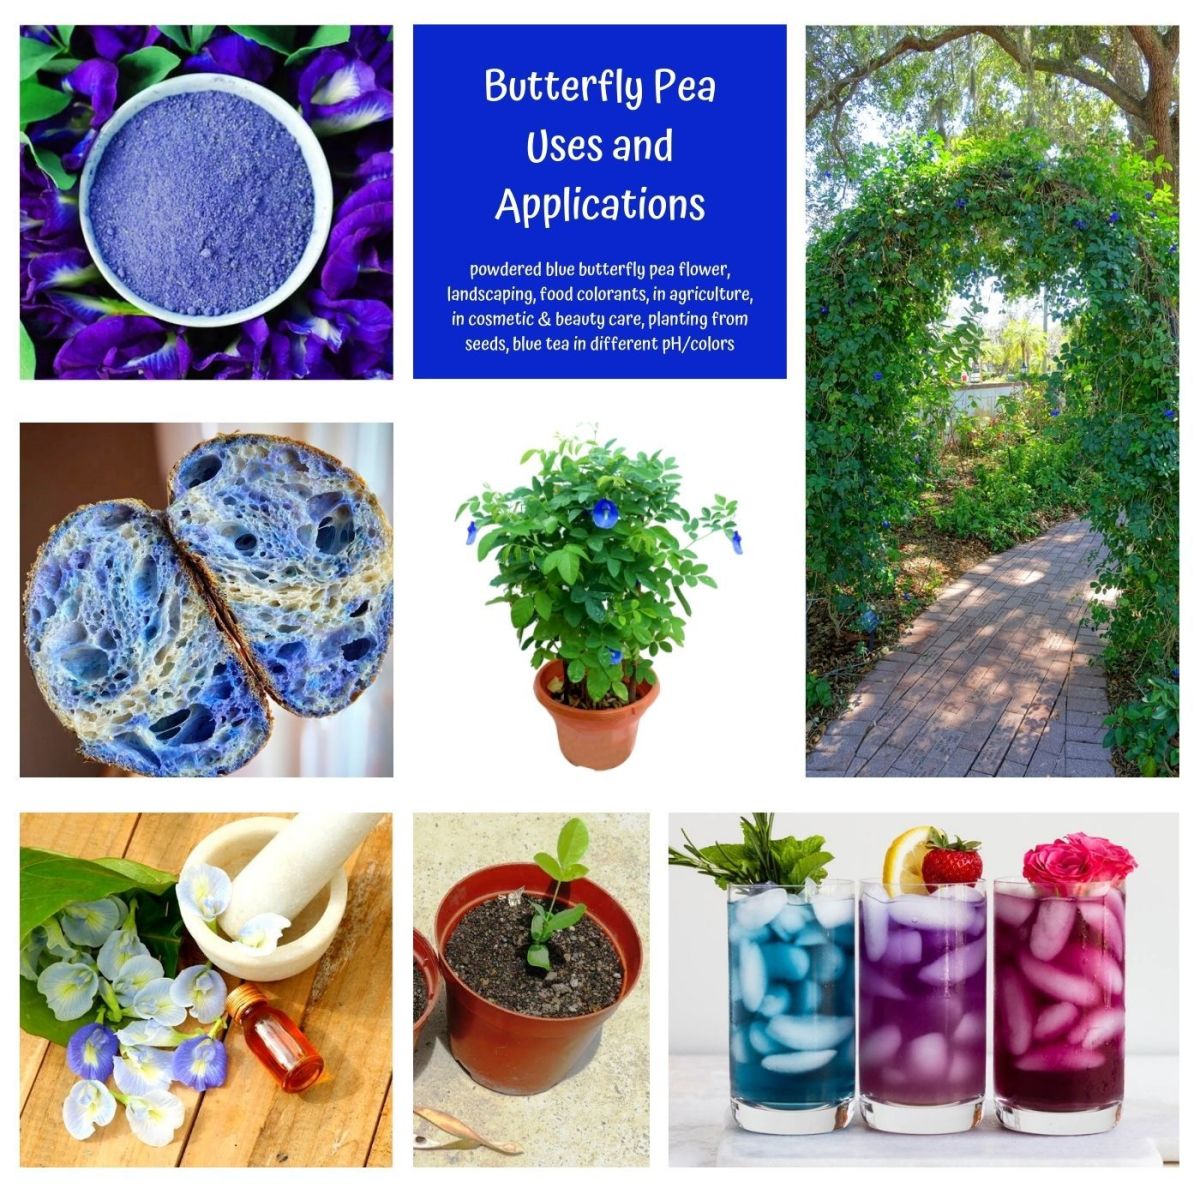 Butterfly pea (Clitoria ternatea) has wide applications not only in the medical but also in food, agriculture, cosmetic and beauty care, and landscaping/gardening. 